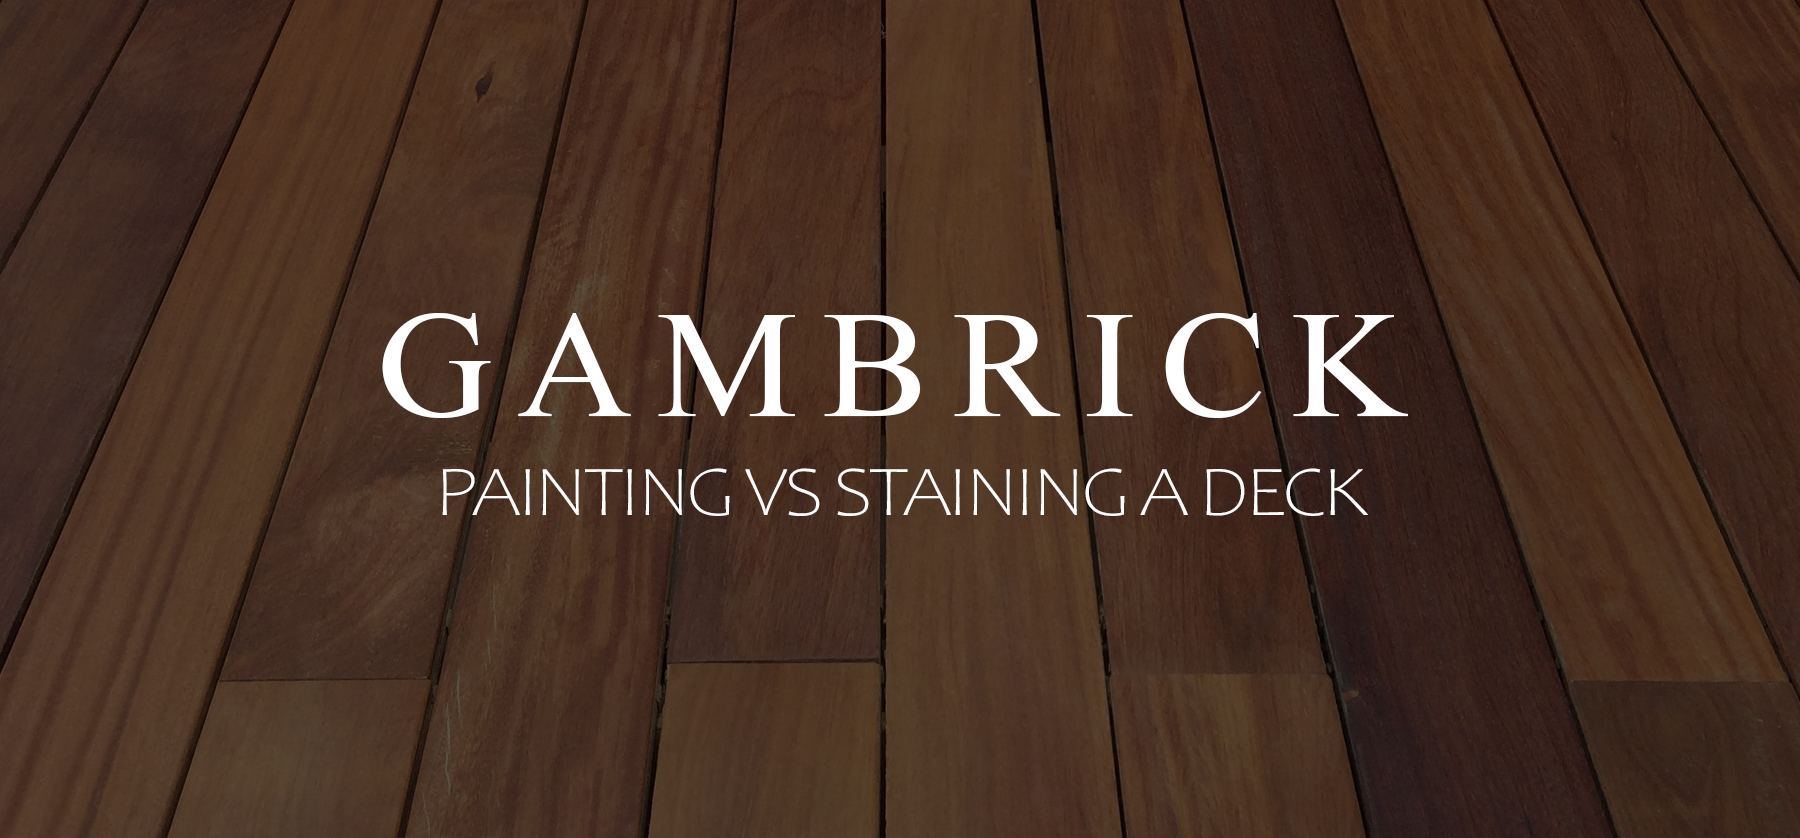 painting vs staining a deck banner pic